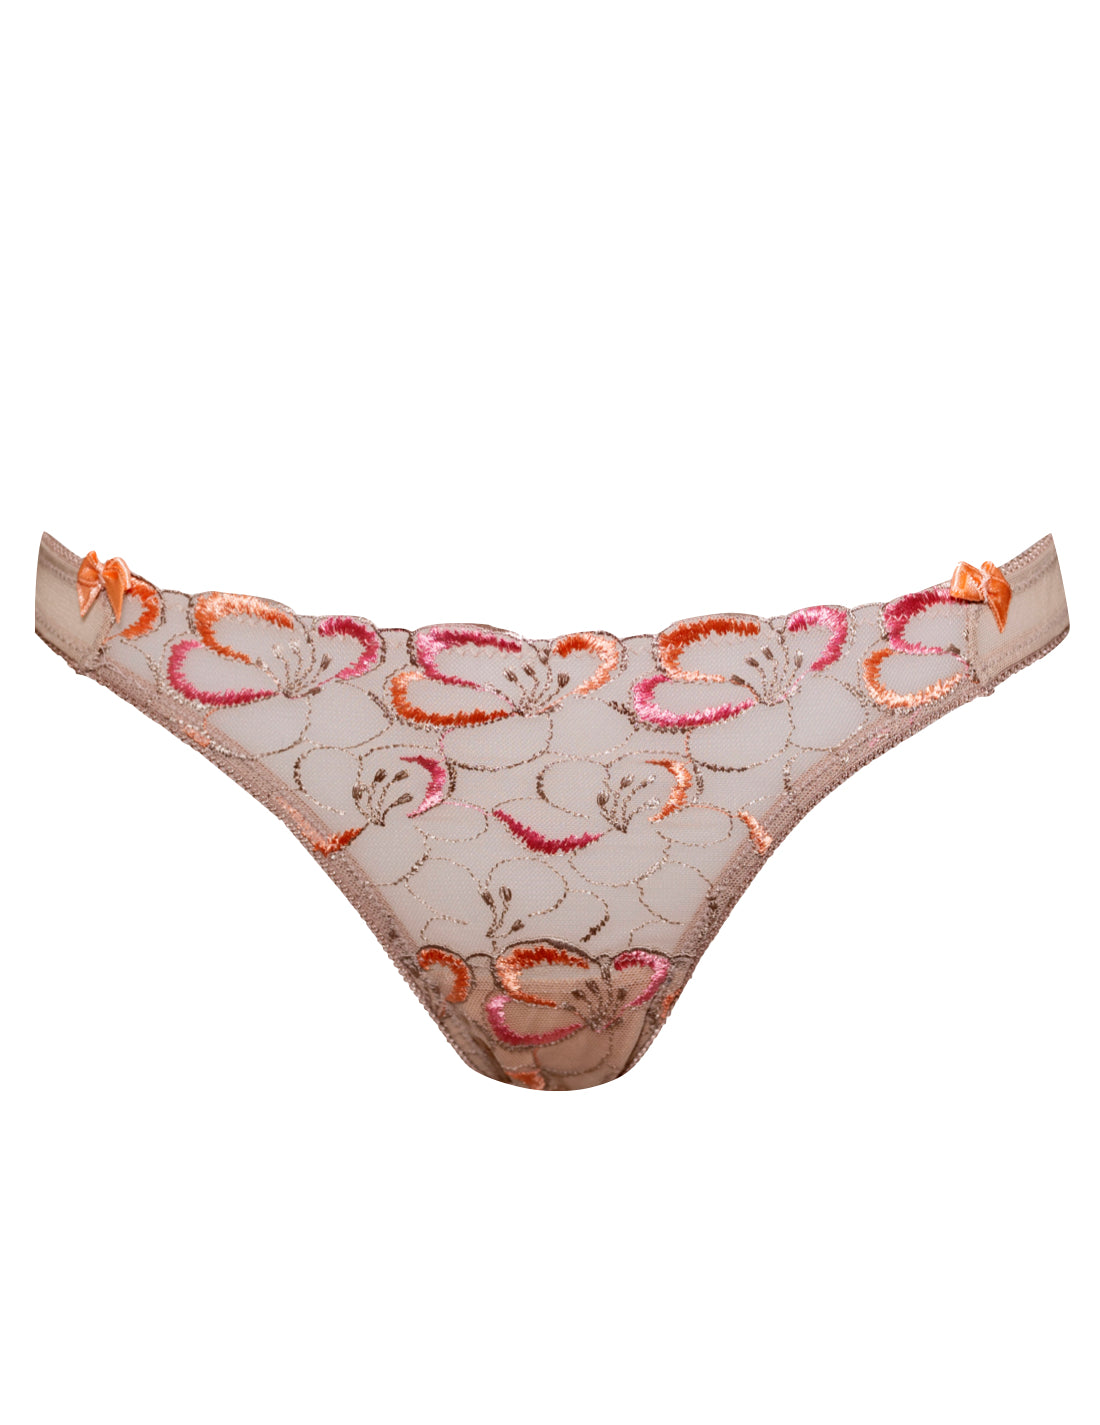 Mimi Fizz Sexy Knickers - For Her from The Luxe Company UK